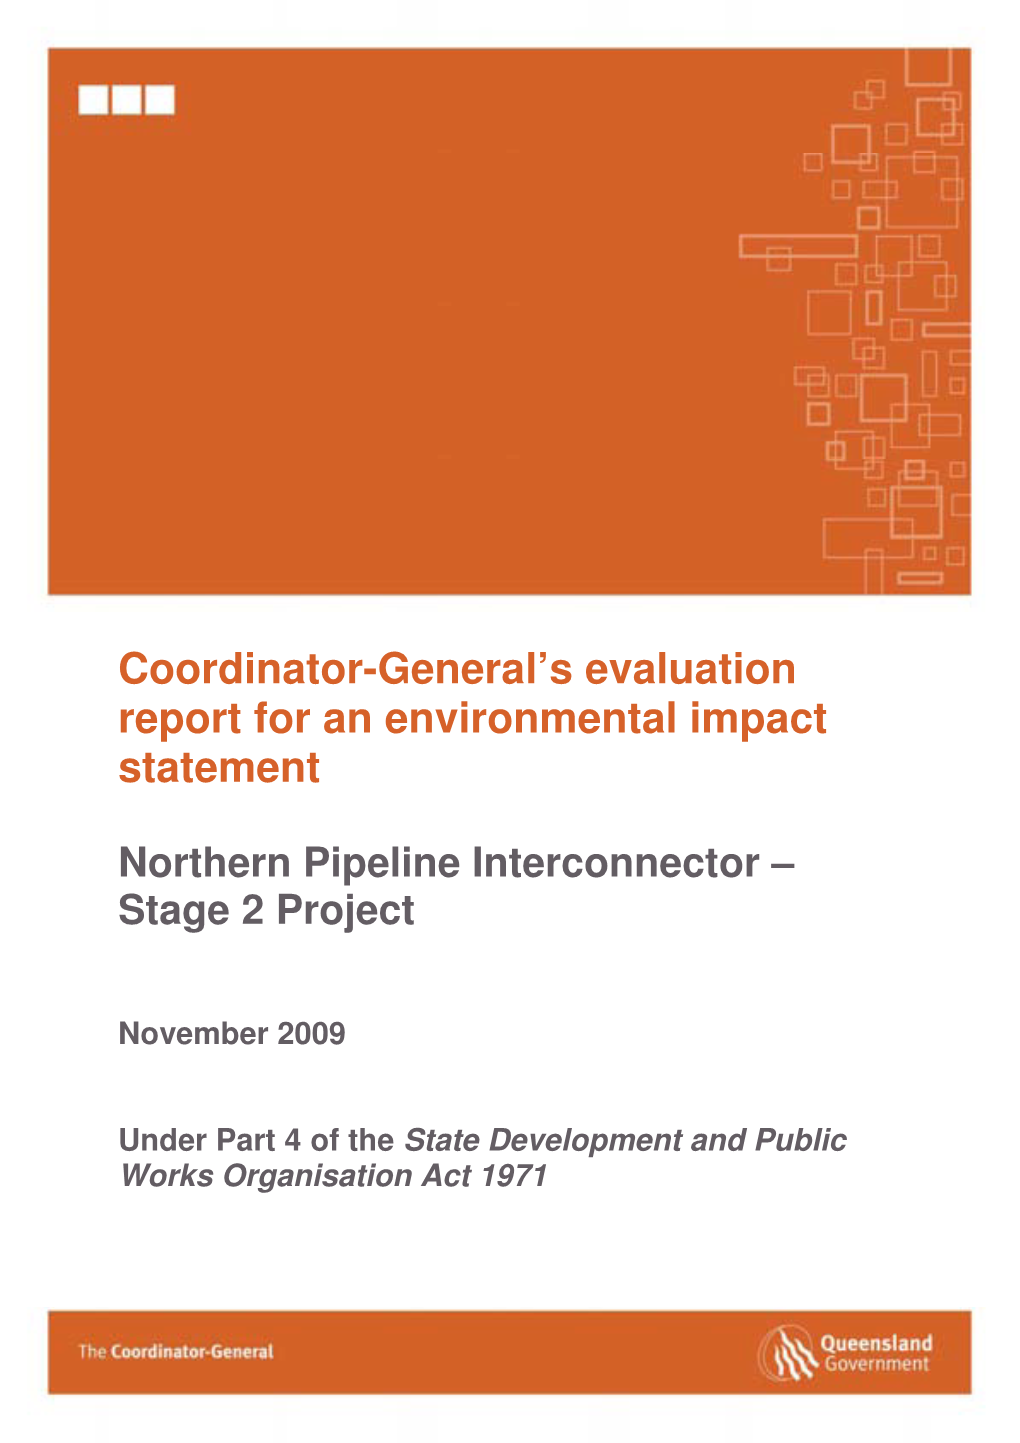 Northern Pipeline Interconnector – Stage 2 Project